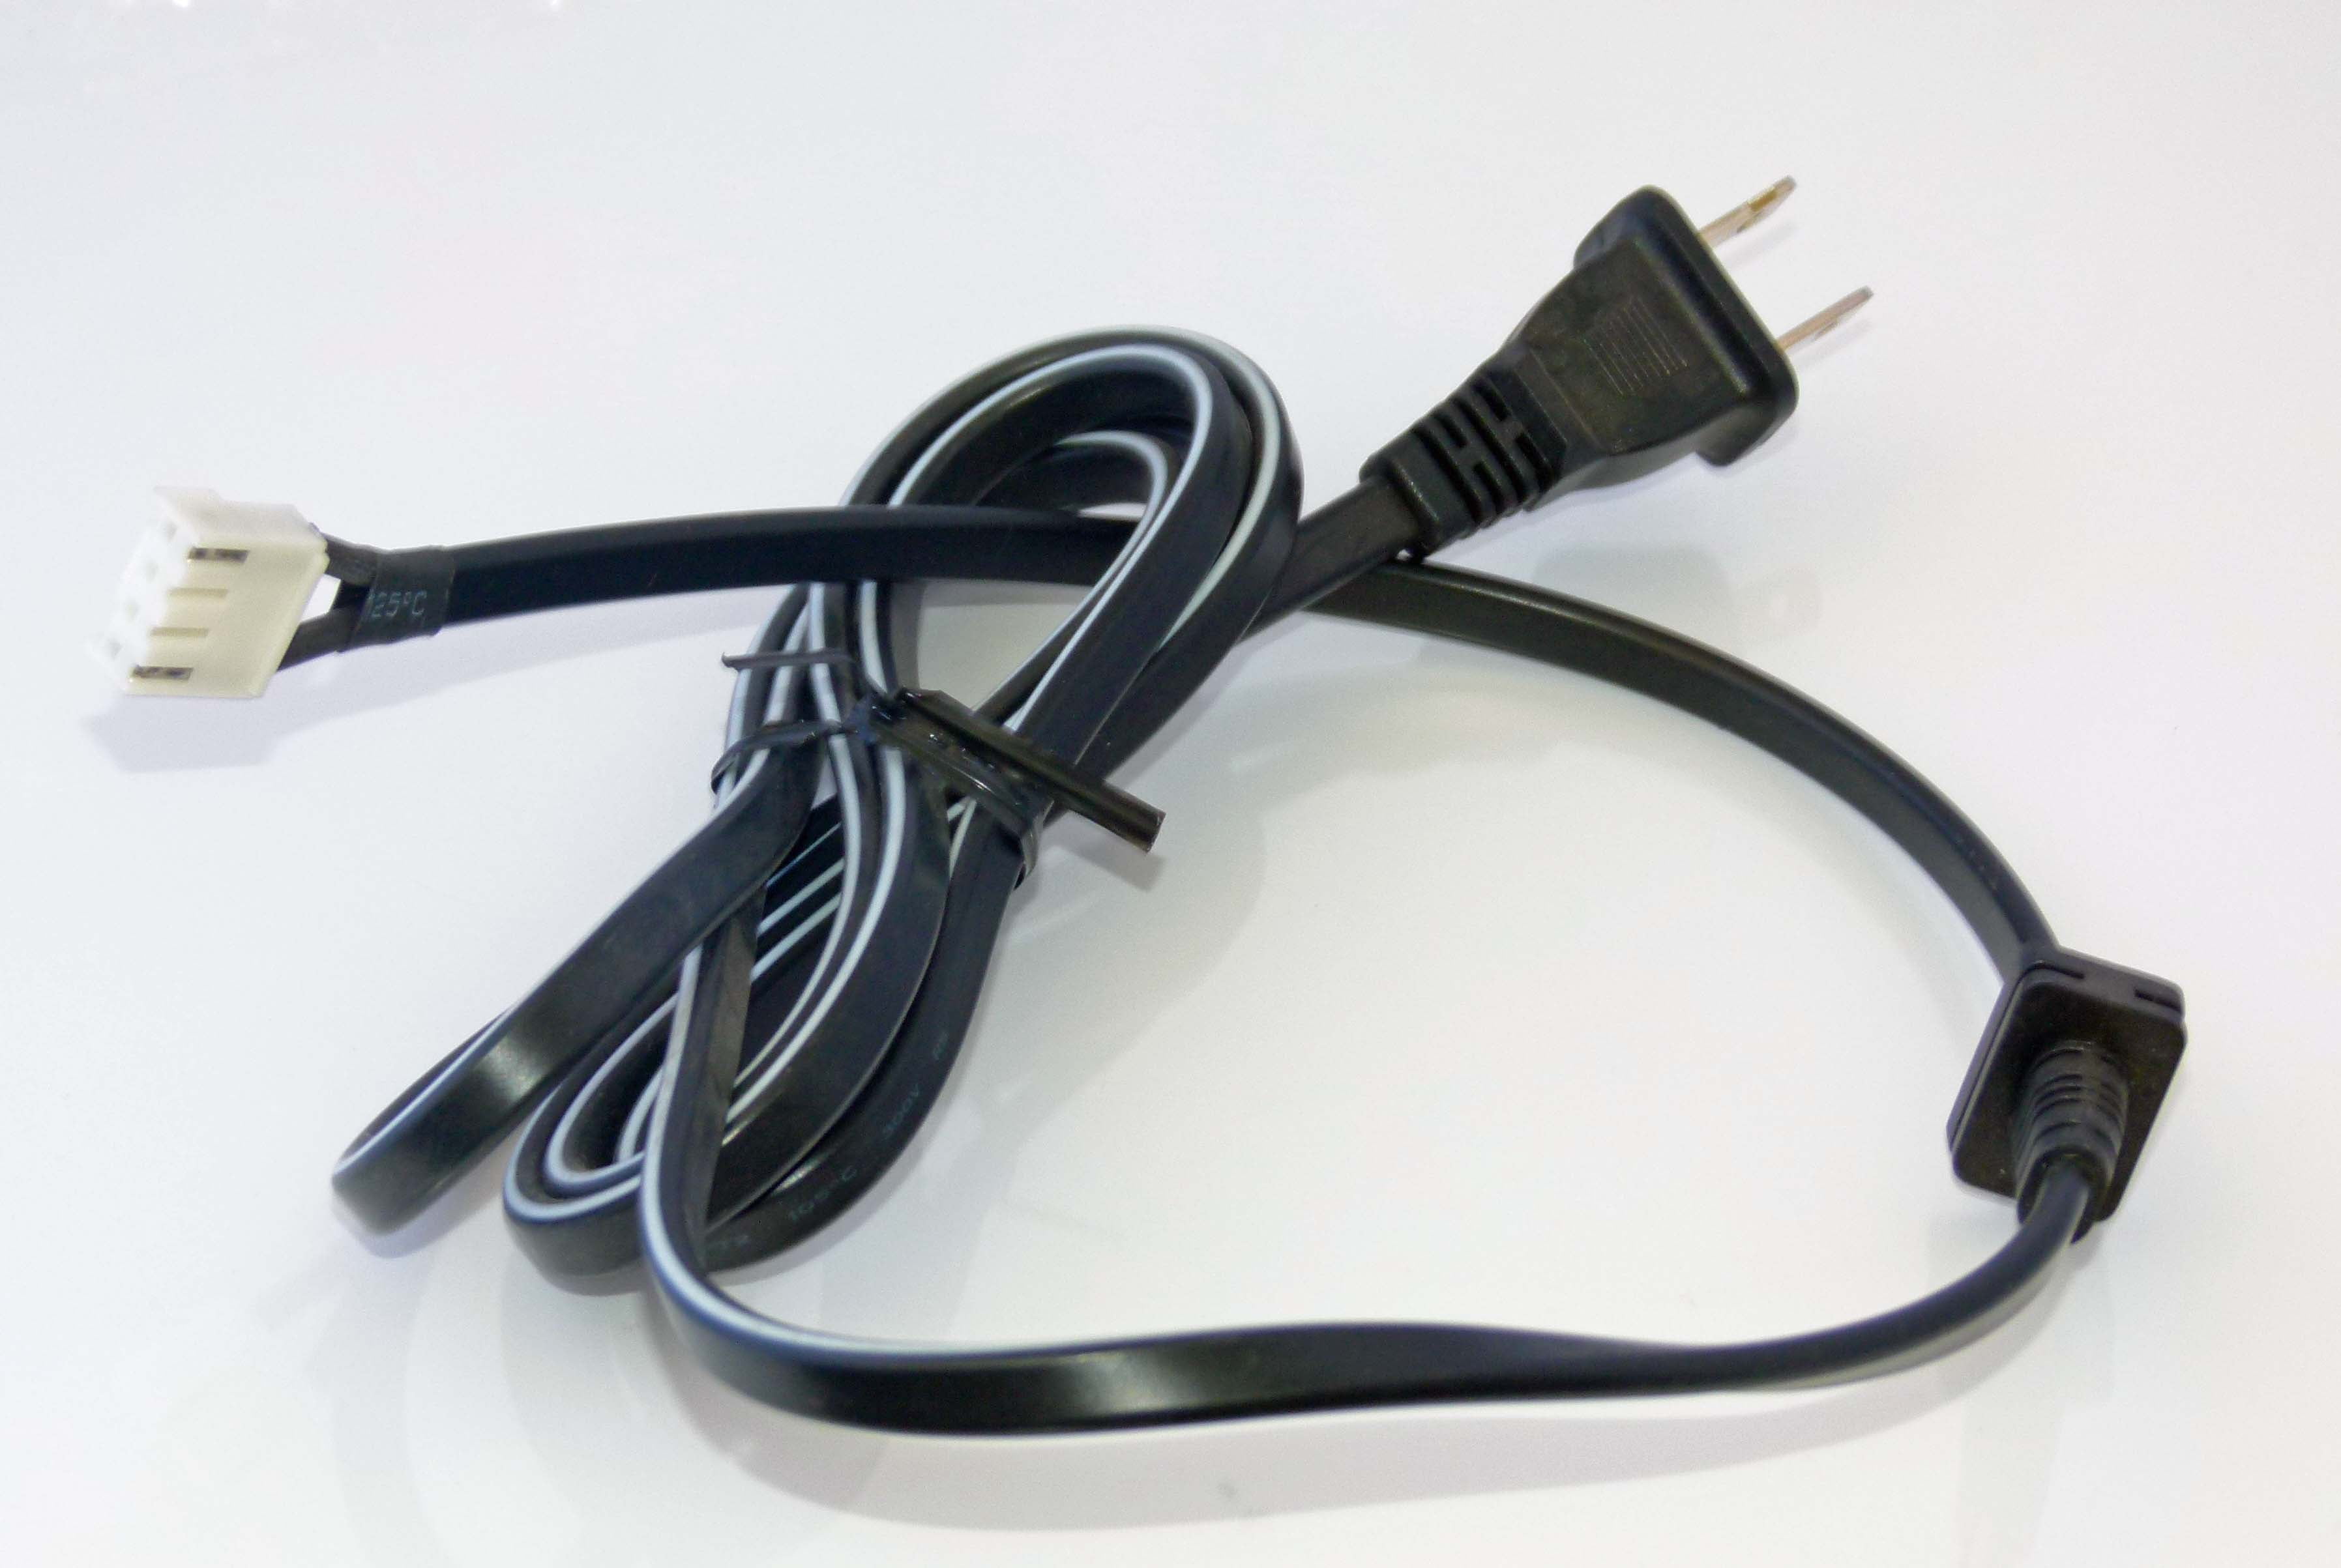 OEM Epson Printer Power Cord Cable USA Only for Epson VS250 VS355 PowerLite 975W